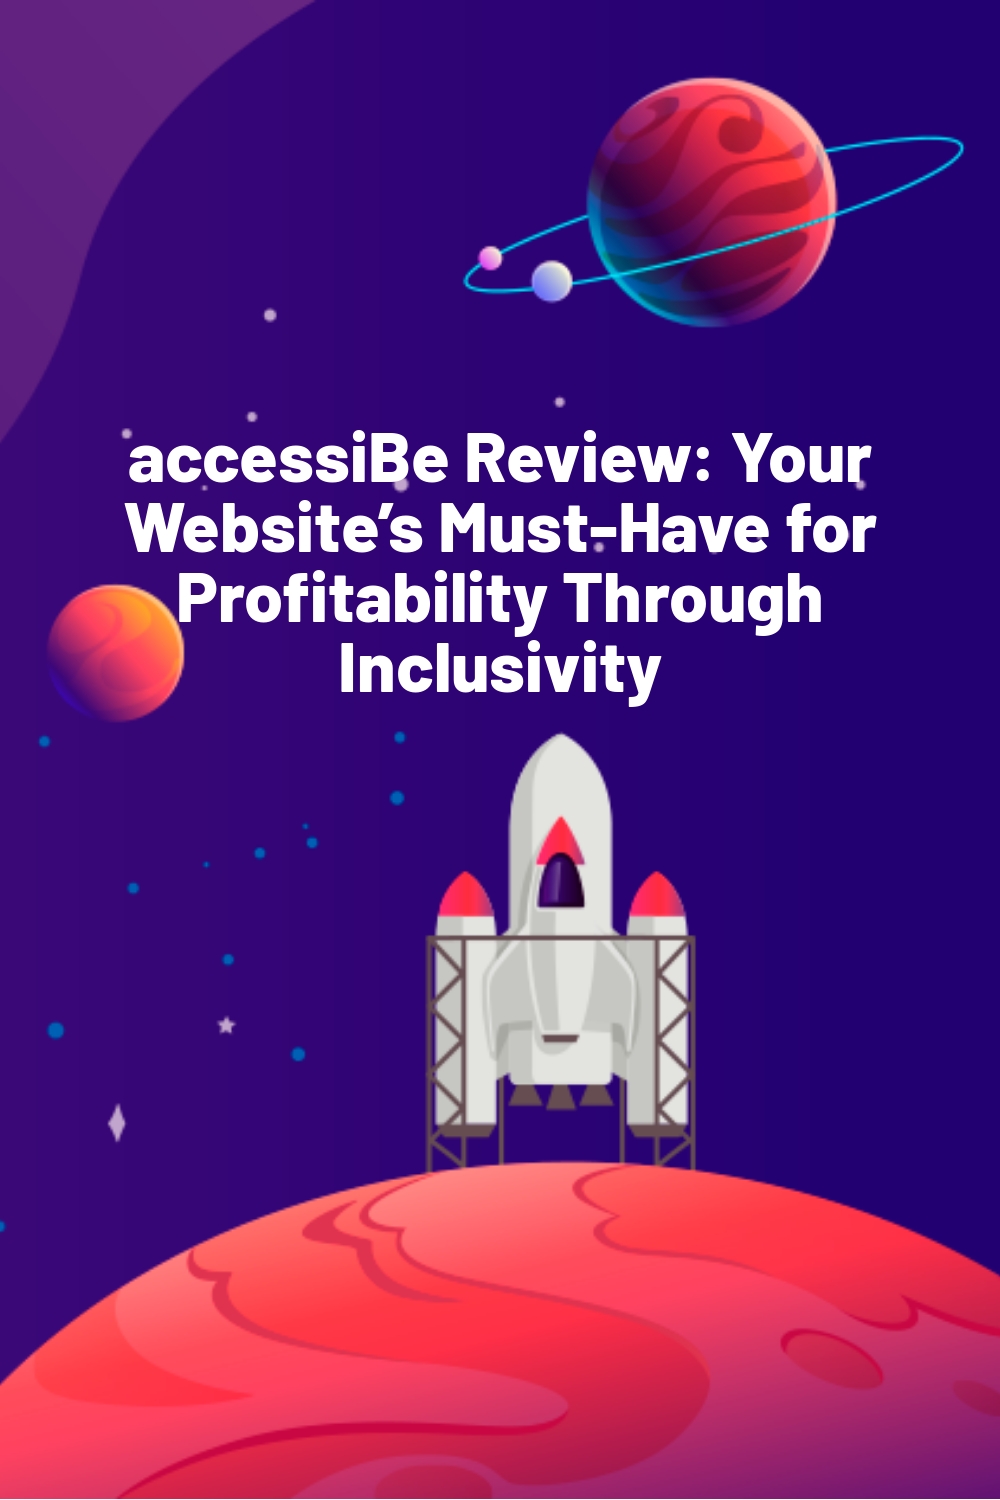 accessiBe Review: Your Website’s Must-Have for Profitability Through Inclusivity